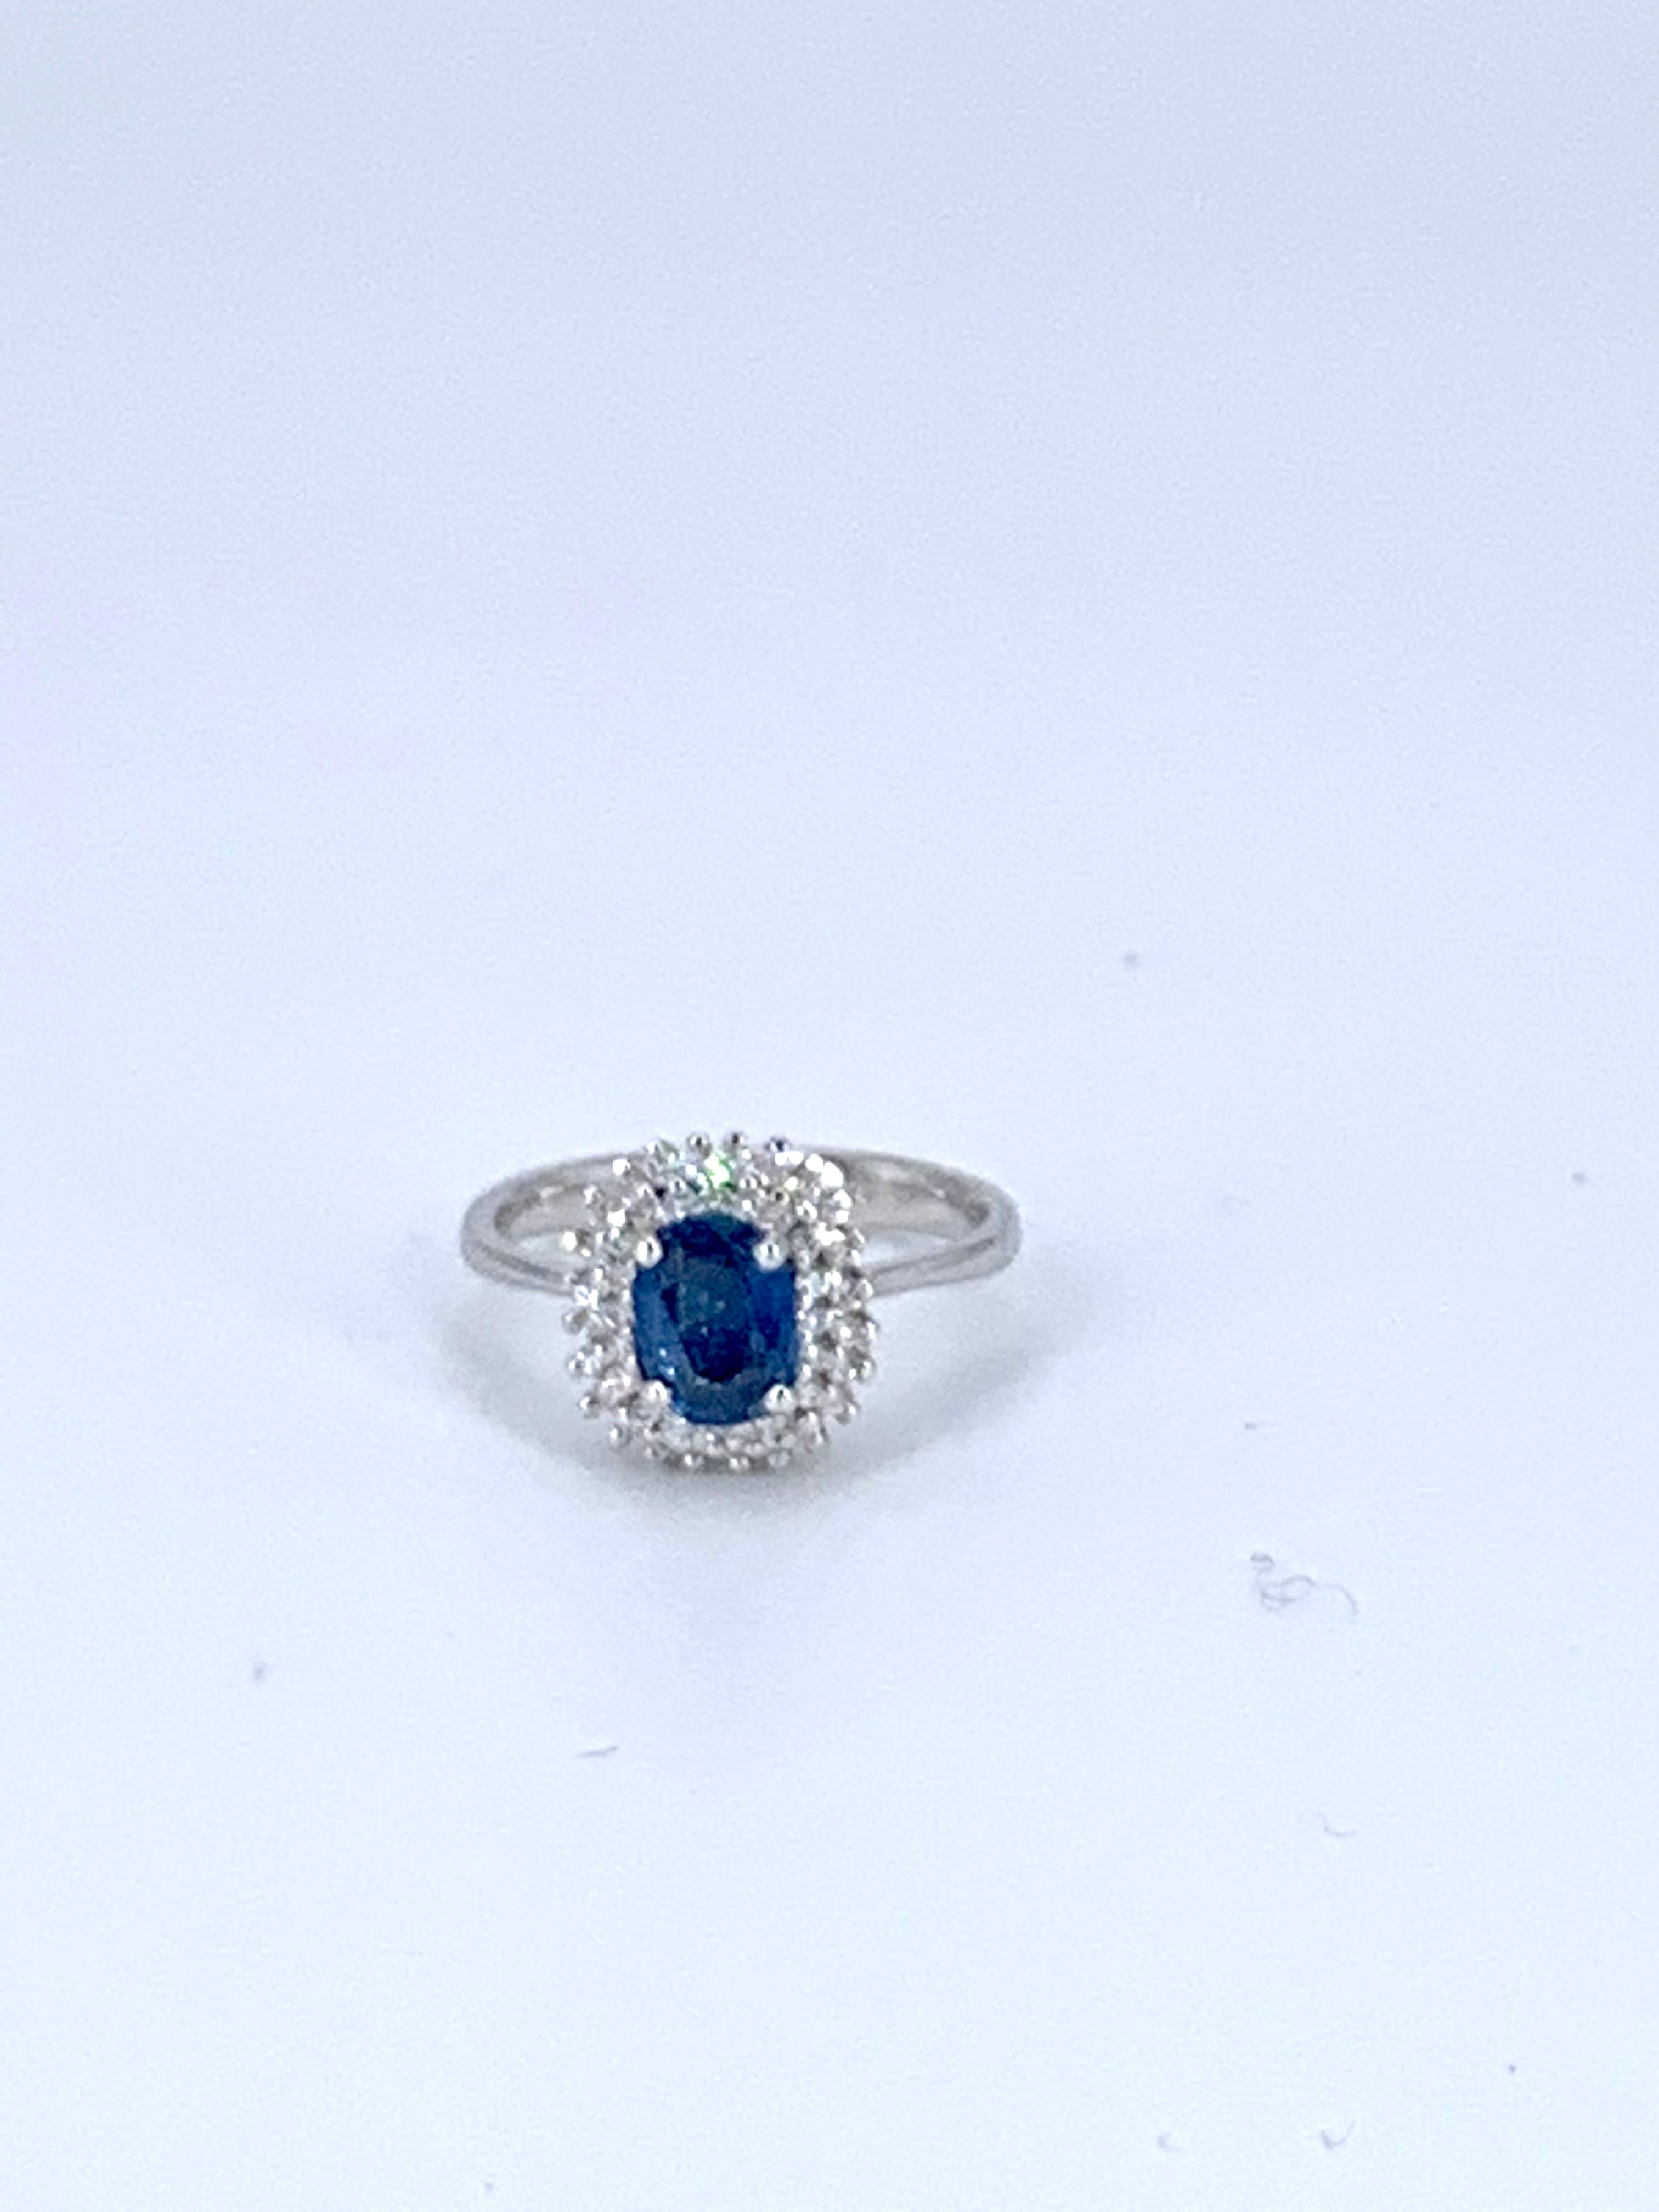 This double halo contemporary Sapphire is 1.12 Carats with 0.34 Carats of diamonds around it. The double halo effect is given with 2 layers (double) the normal halo effect, gifting the Sapphire in the centre more light and beauty. 

Set in 18Kt